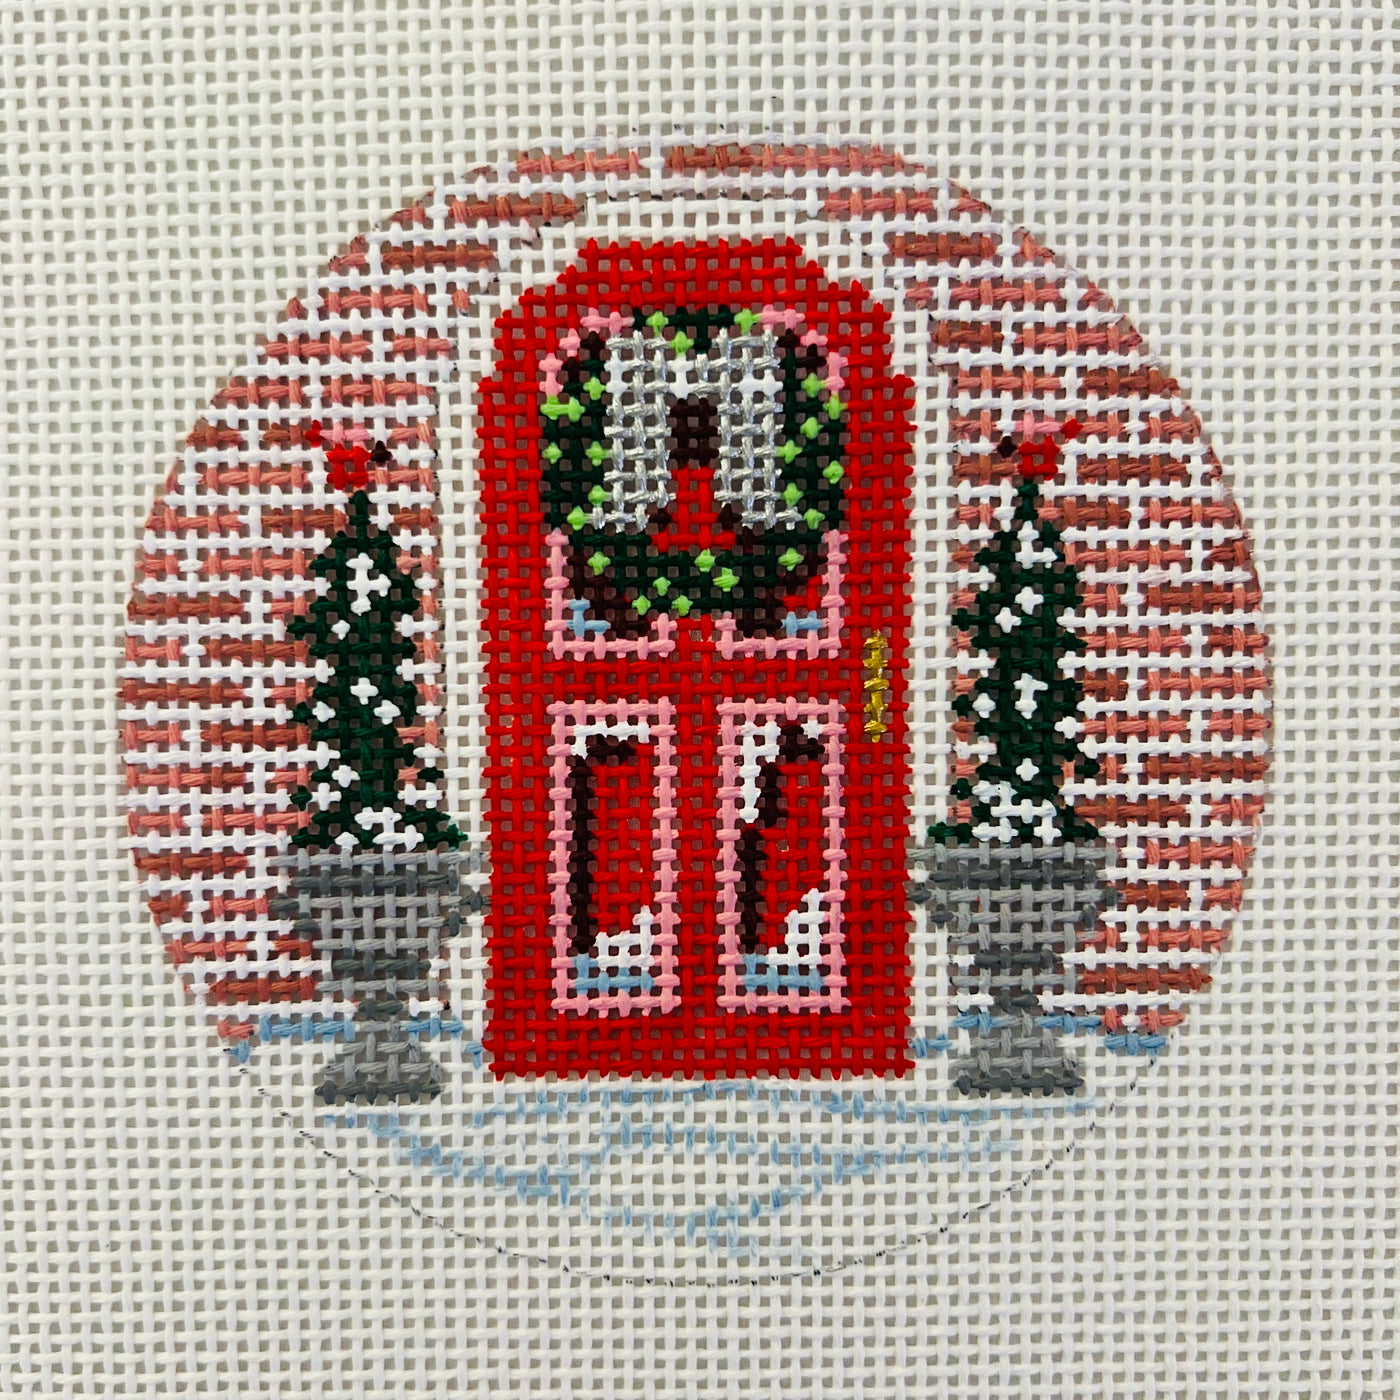 Red Door with Topiaries Ornament Needlepoint Canvas